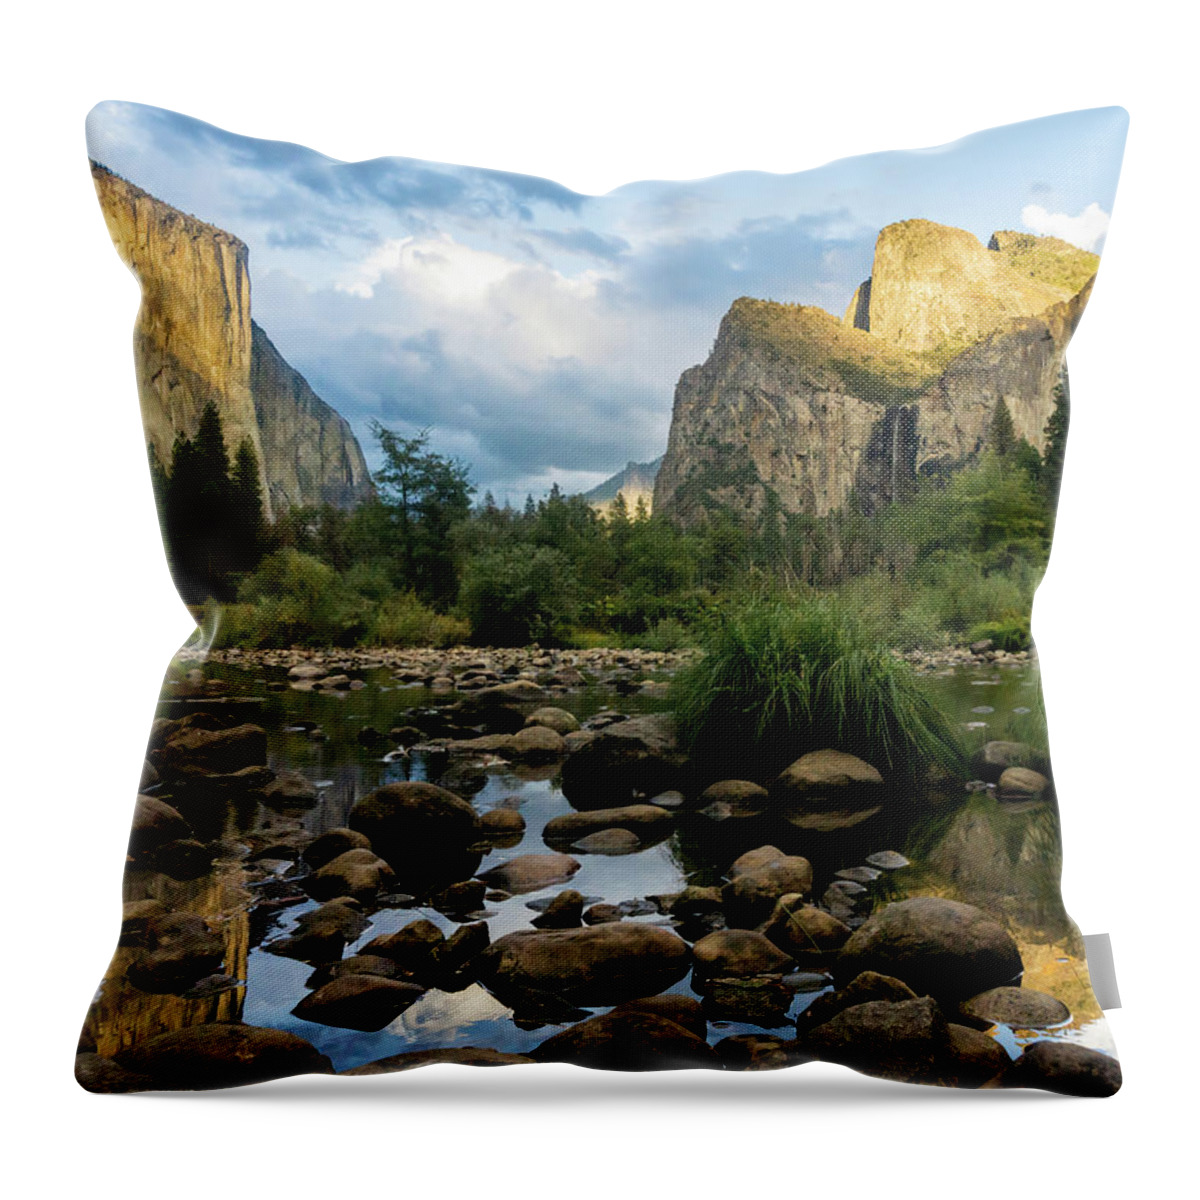 Skyline Throw Pillow featuring the photograph Gates Of The Valley 3 by Silvia Marcoschamer